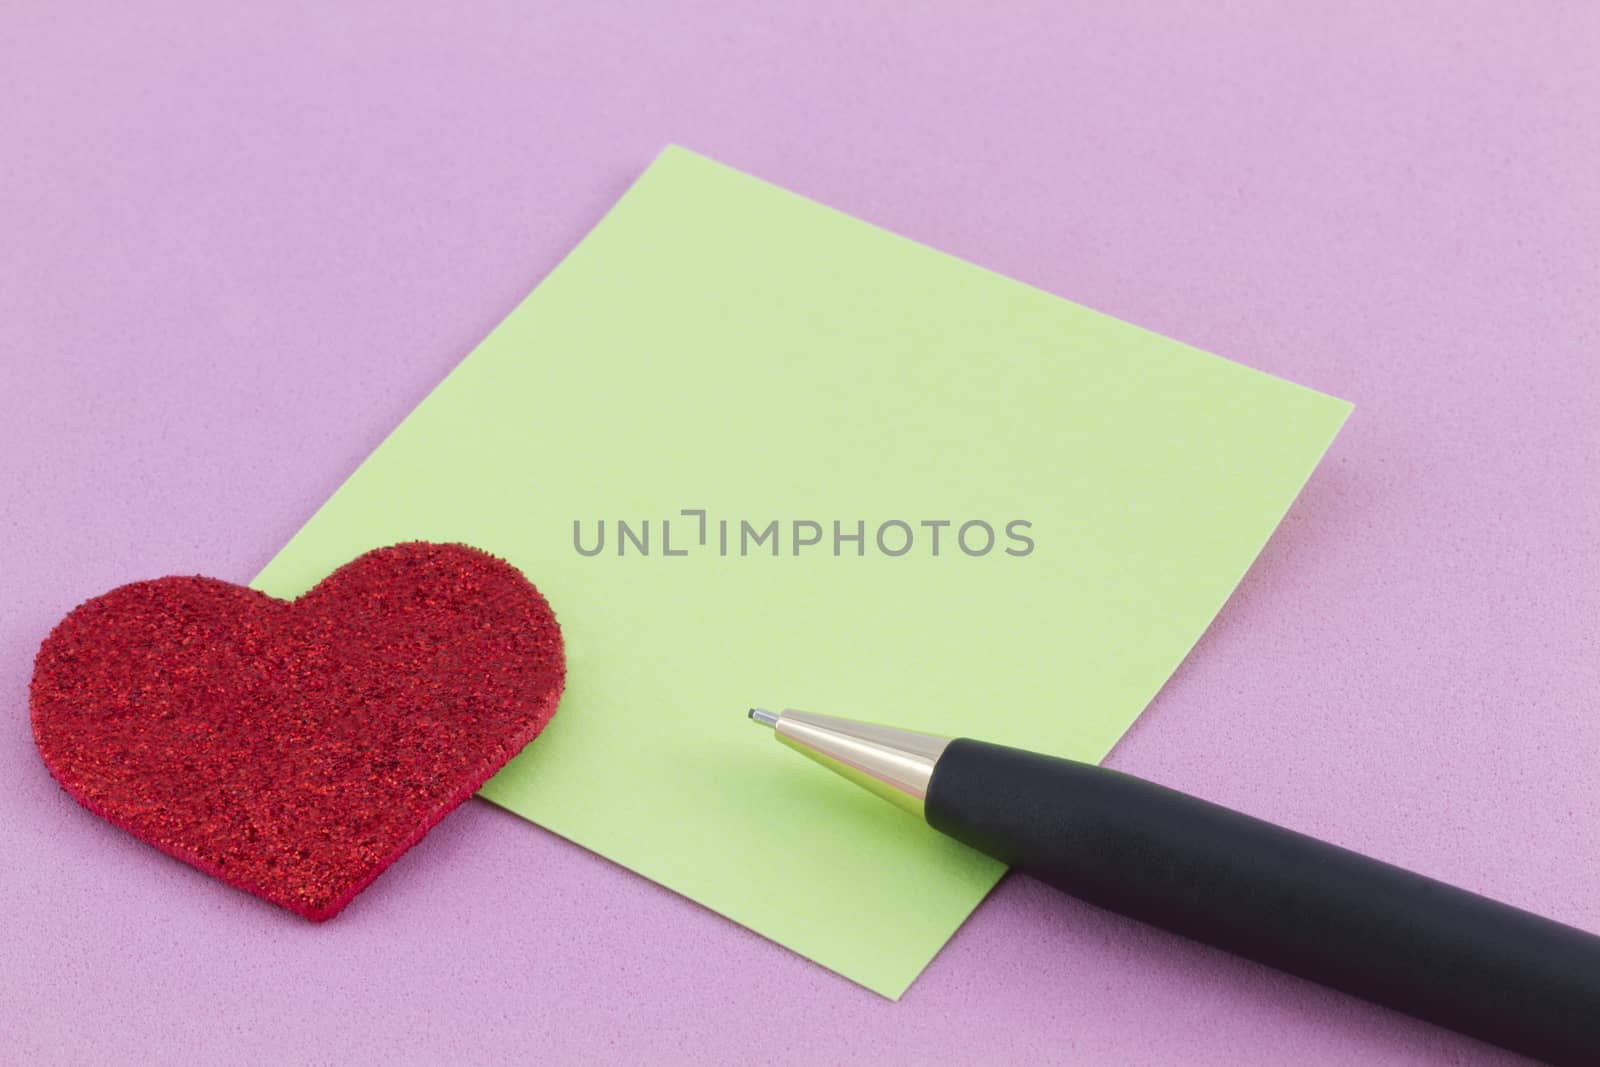 Sparkling red heart next to green note square with black pen on pink background. Copy space available.